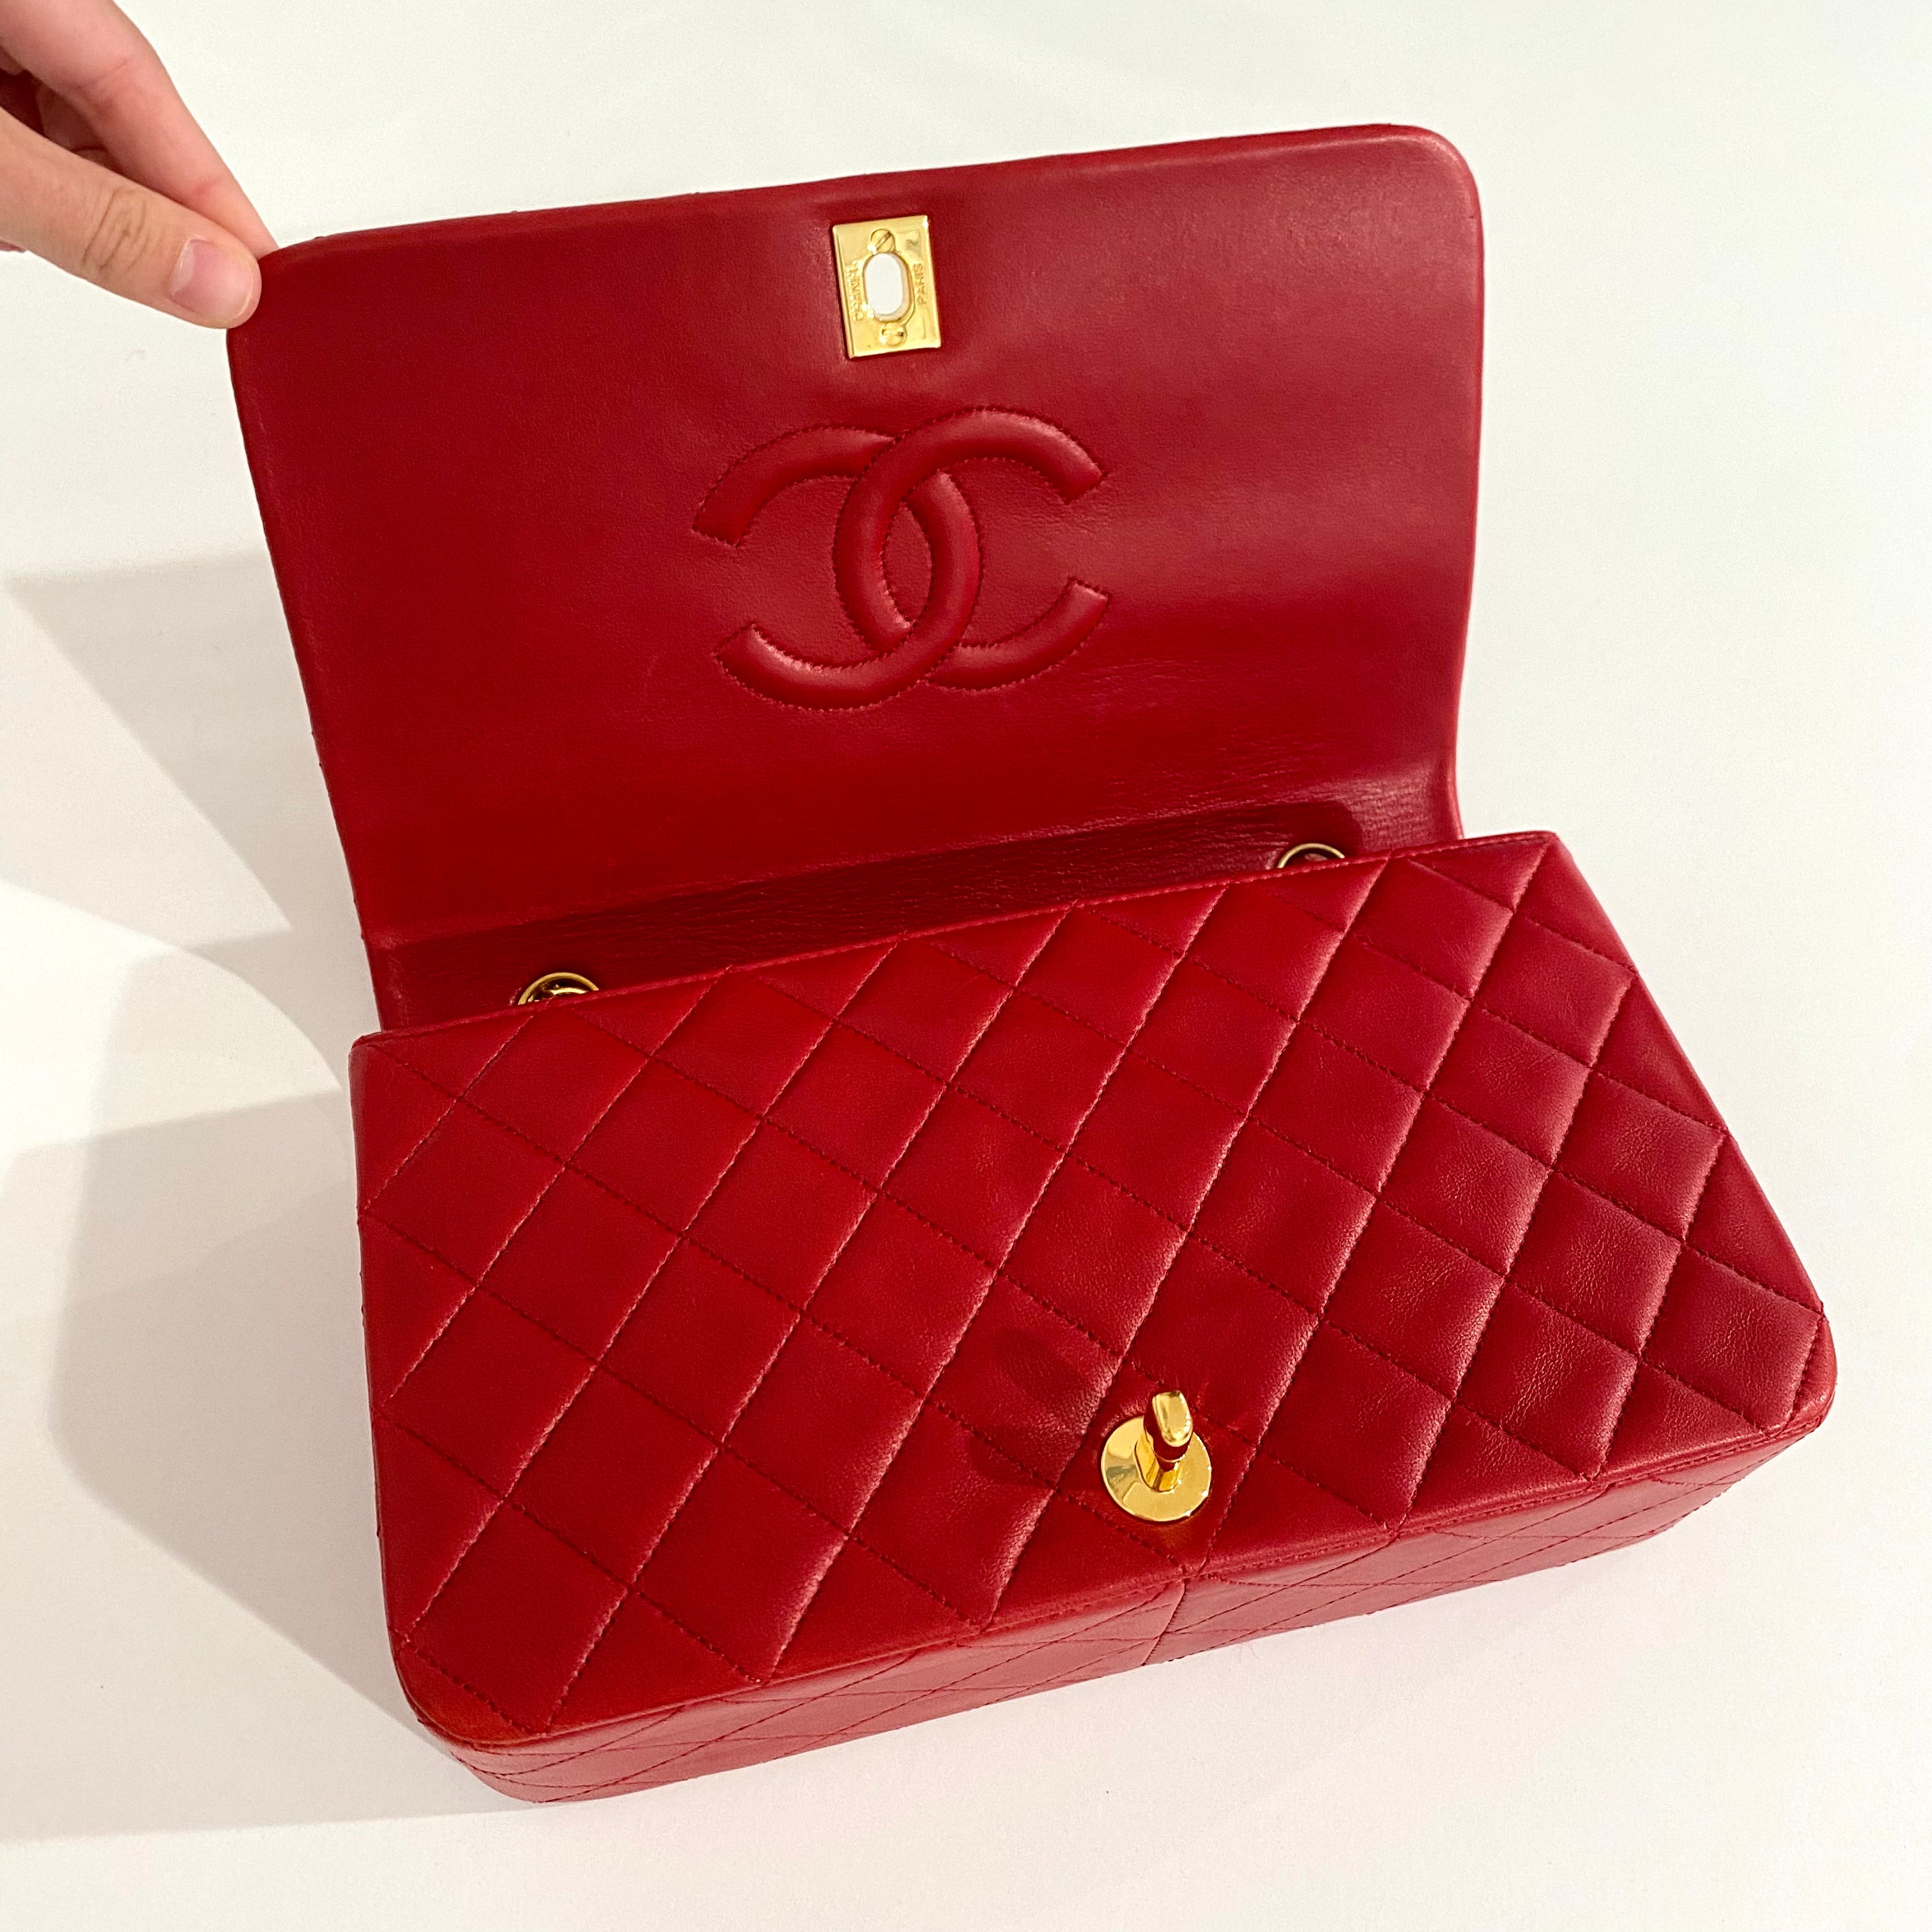 CHANEL, Bags, Chanel Vintage Cc Red Classic Flap Quilted Mini Square  Matelasse Bag